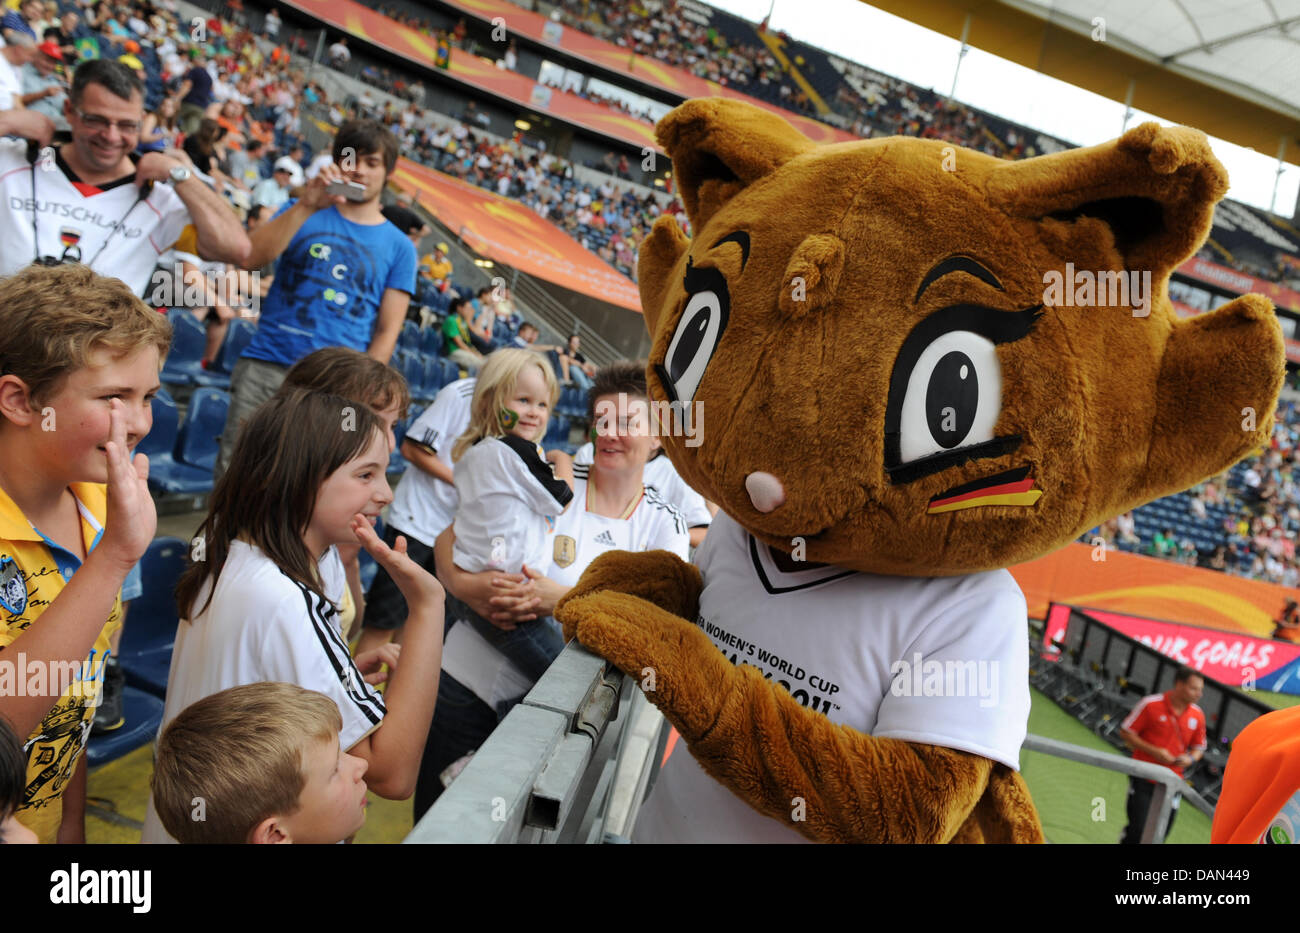 World Cup mascot Karla Kick celebrates with young supporters prior to the Group D match Equatorial Guinea against Brazil of FIFA Women's World Cup soccer tournament at the FIFA Women's World Cup Stadium in Frankfurt, Germany, 06 July 2011. Foto: Arne Dedert dpa/lhe Stock Photo